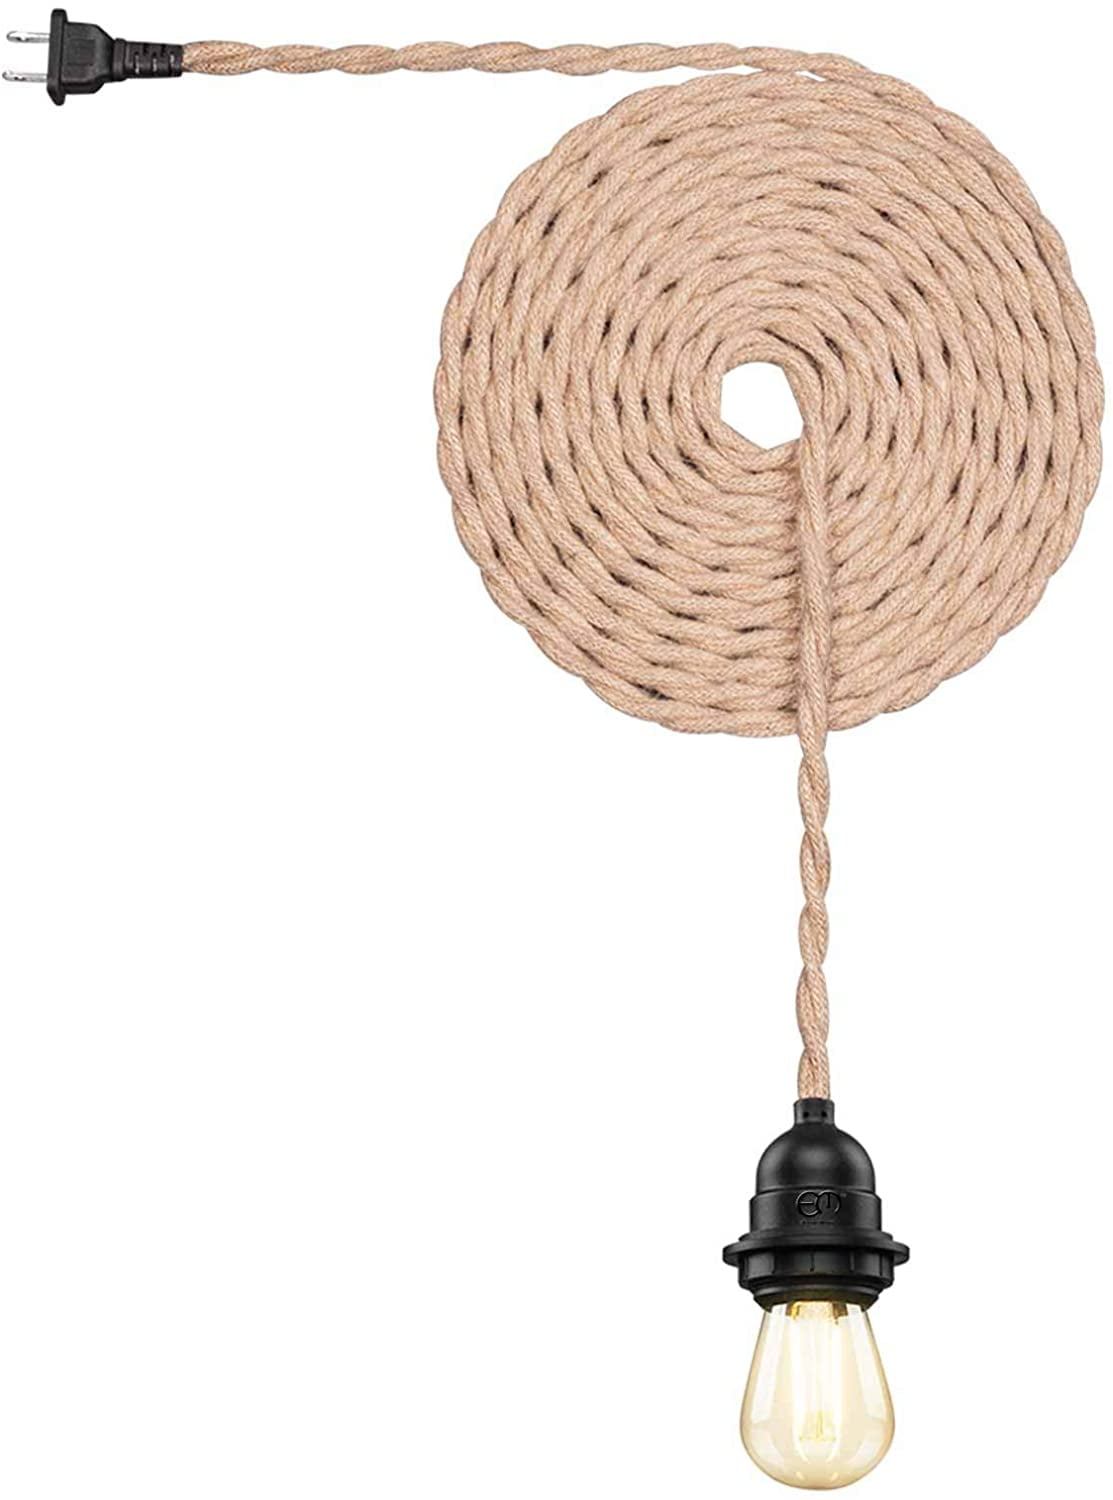 ArcoMead 16.6ft Farmhouse Weatherproof Hanging Pendant Light Kit with  Twisted Hemp Rope, E26 Outdoor Ceiling Lighting Cord Fixture for Industrial  DIY Projects Office Bar Backyard Balcony Party 